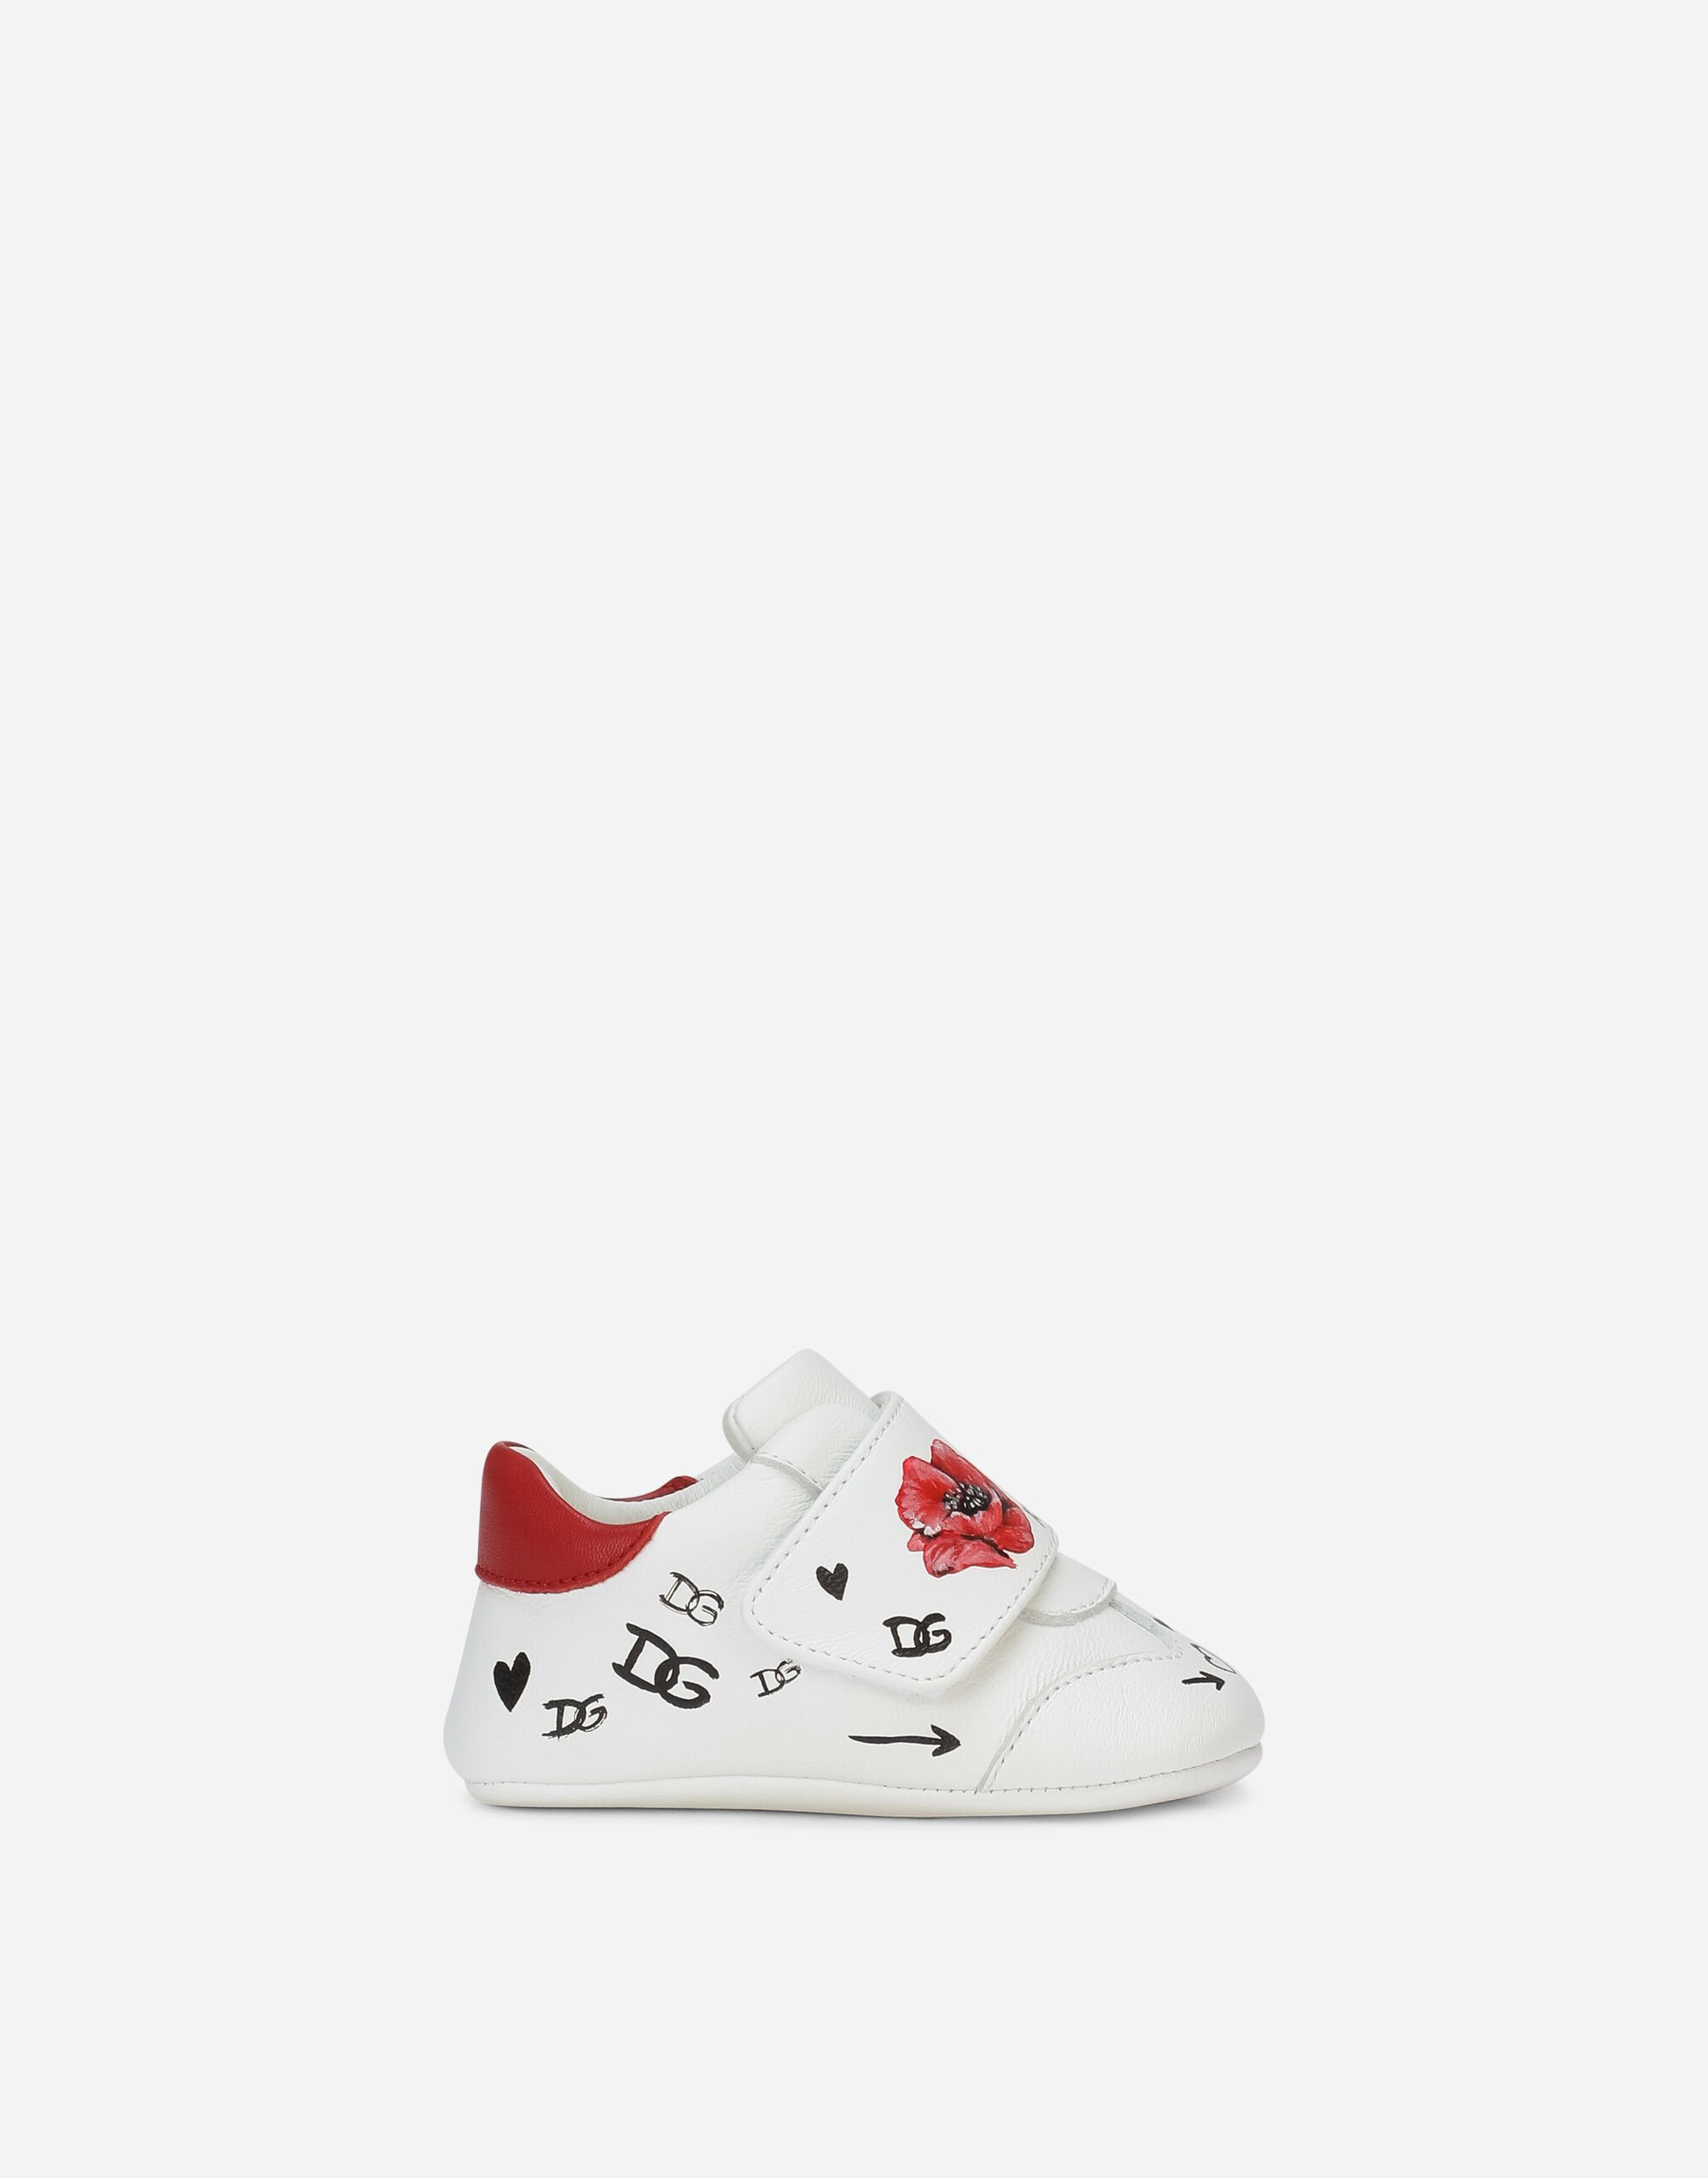 Dolce & Gabbana Nappa leather newborn sneakers with poppy print Print D20086AD471